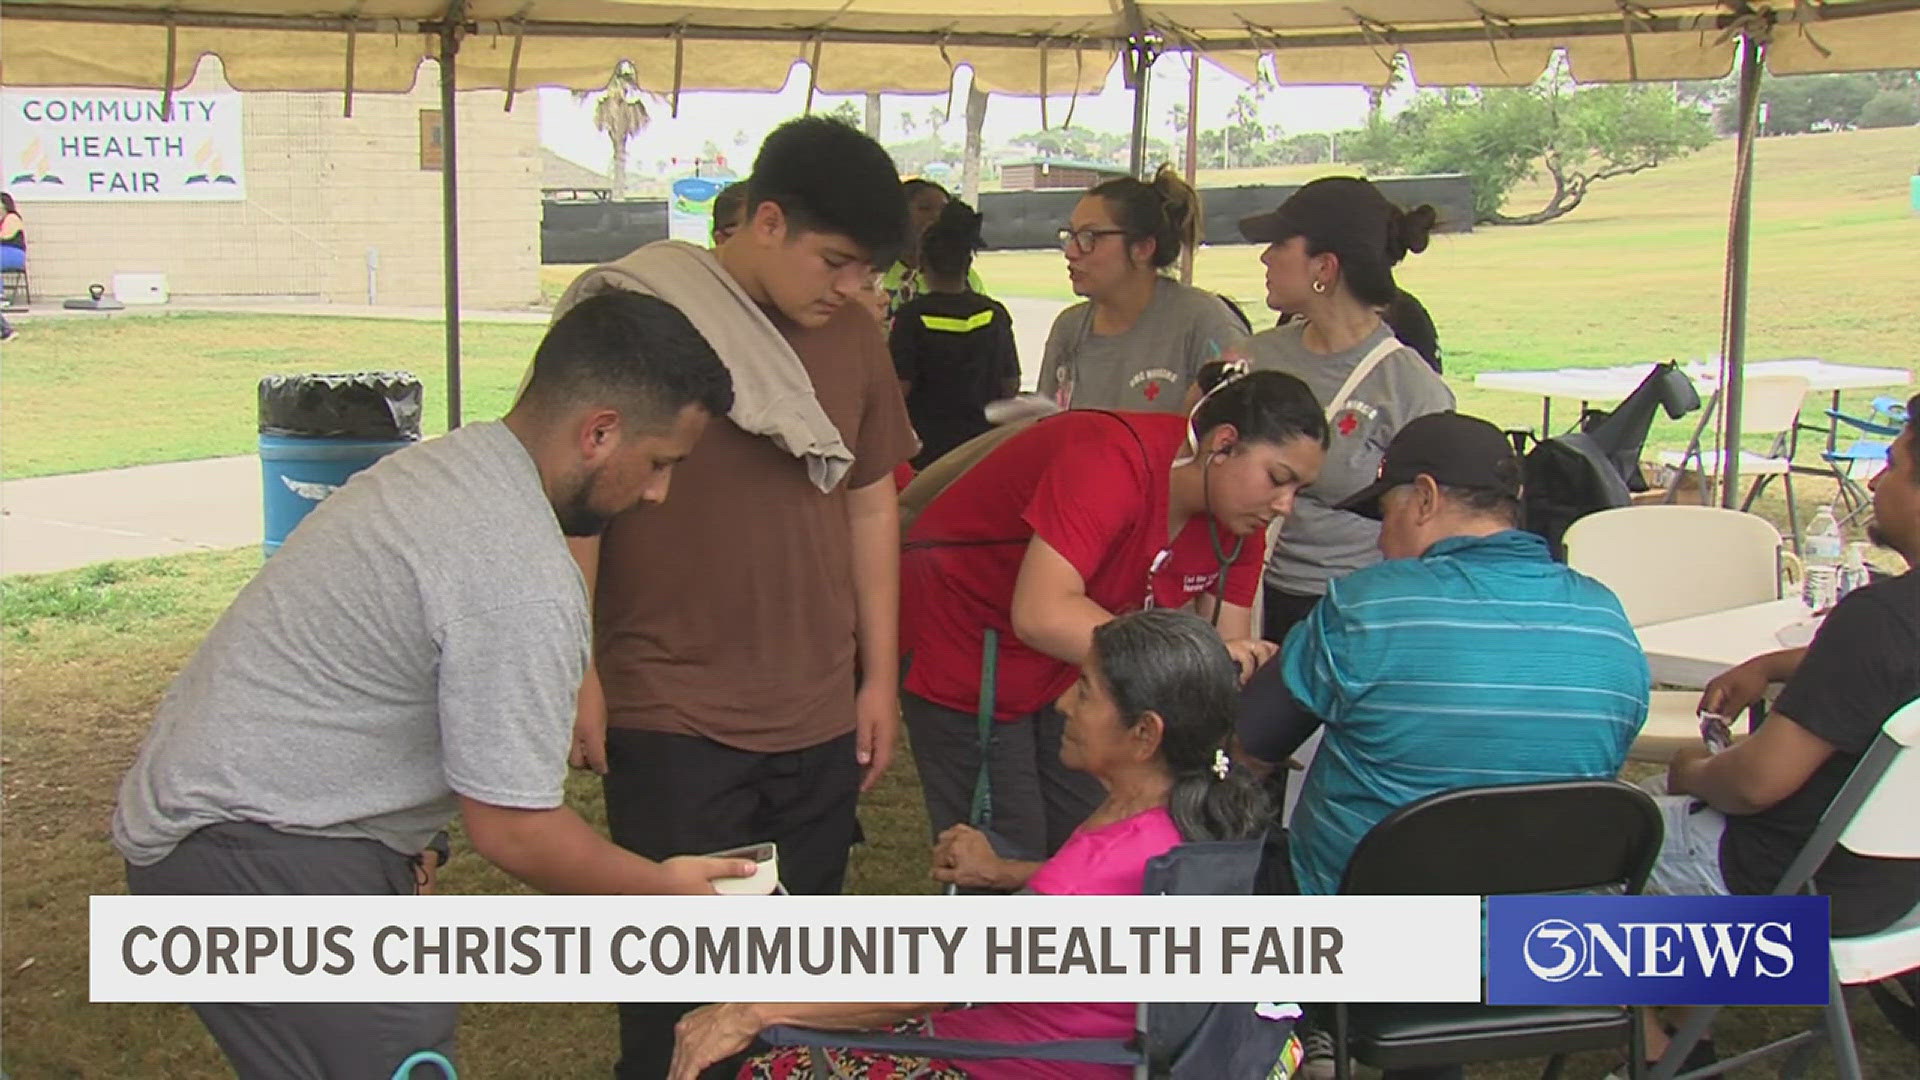 This was the largest health fair held and organizers expect it to grow every year.